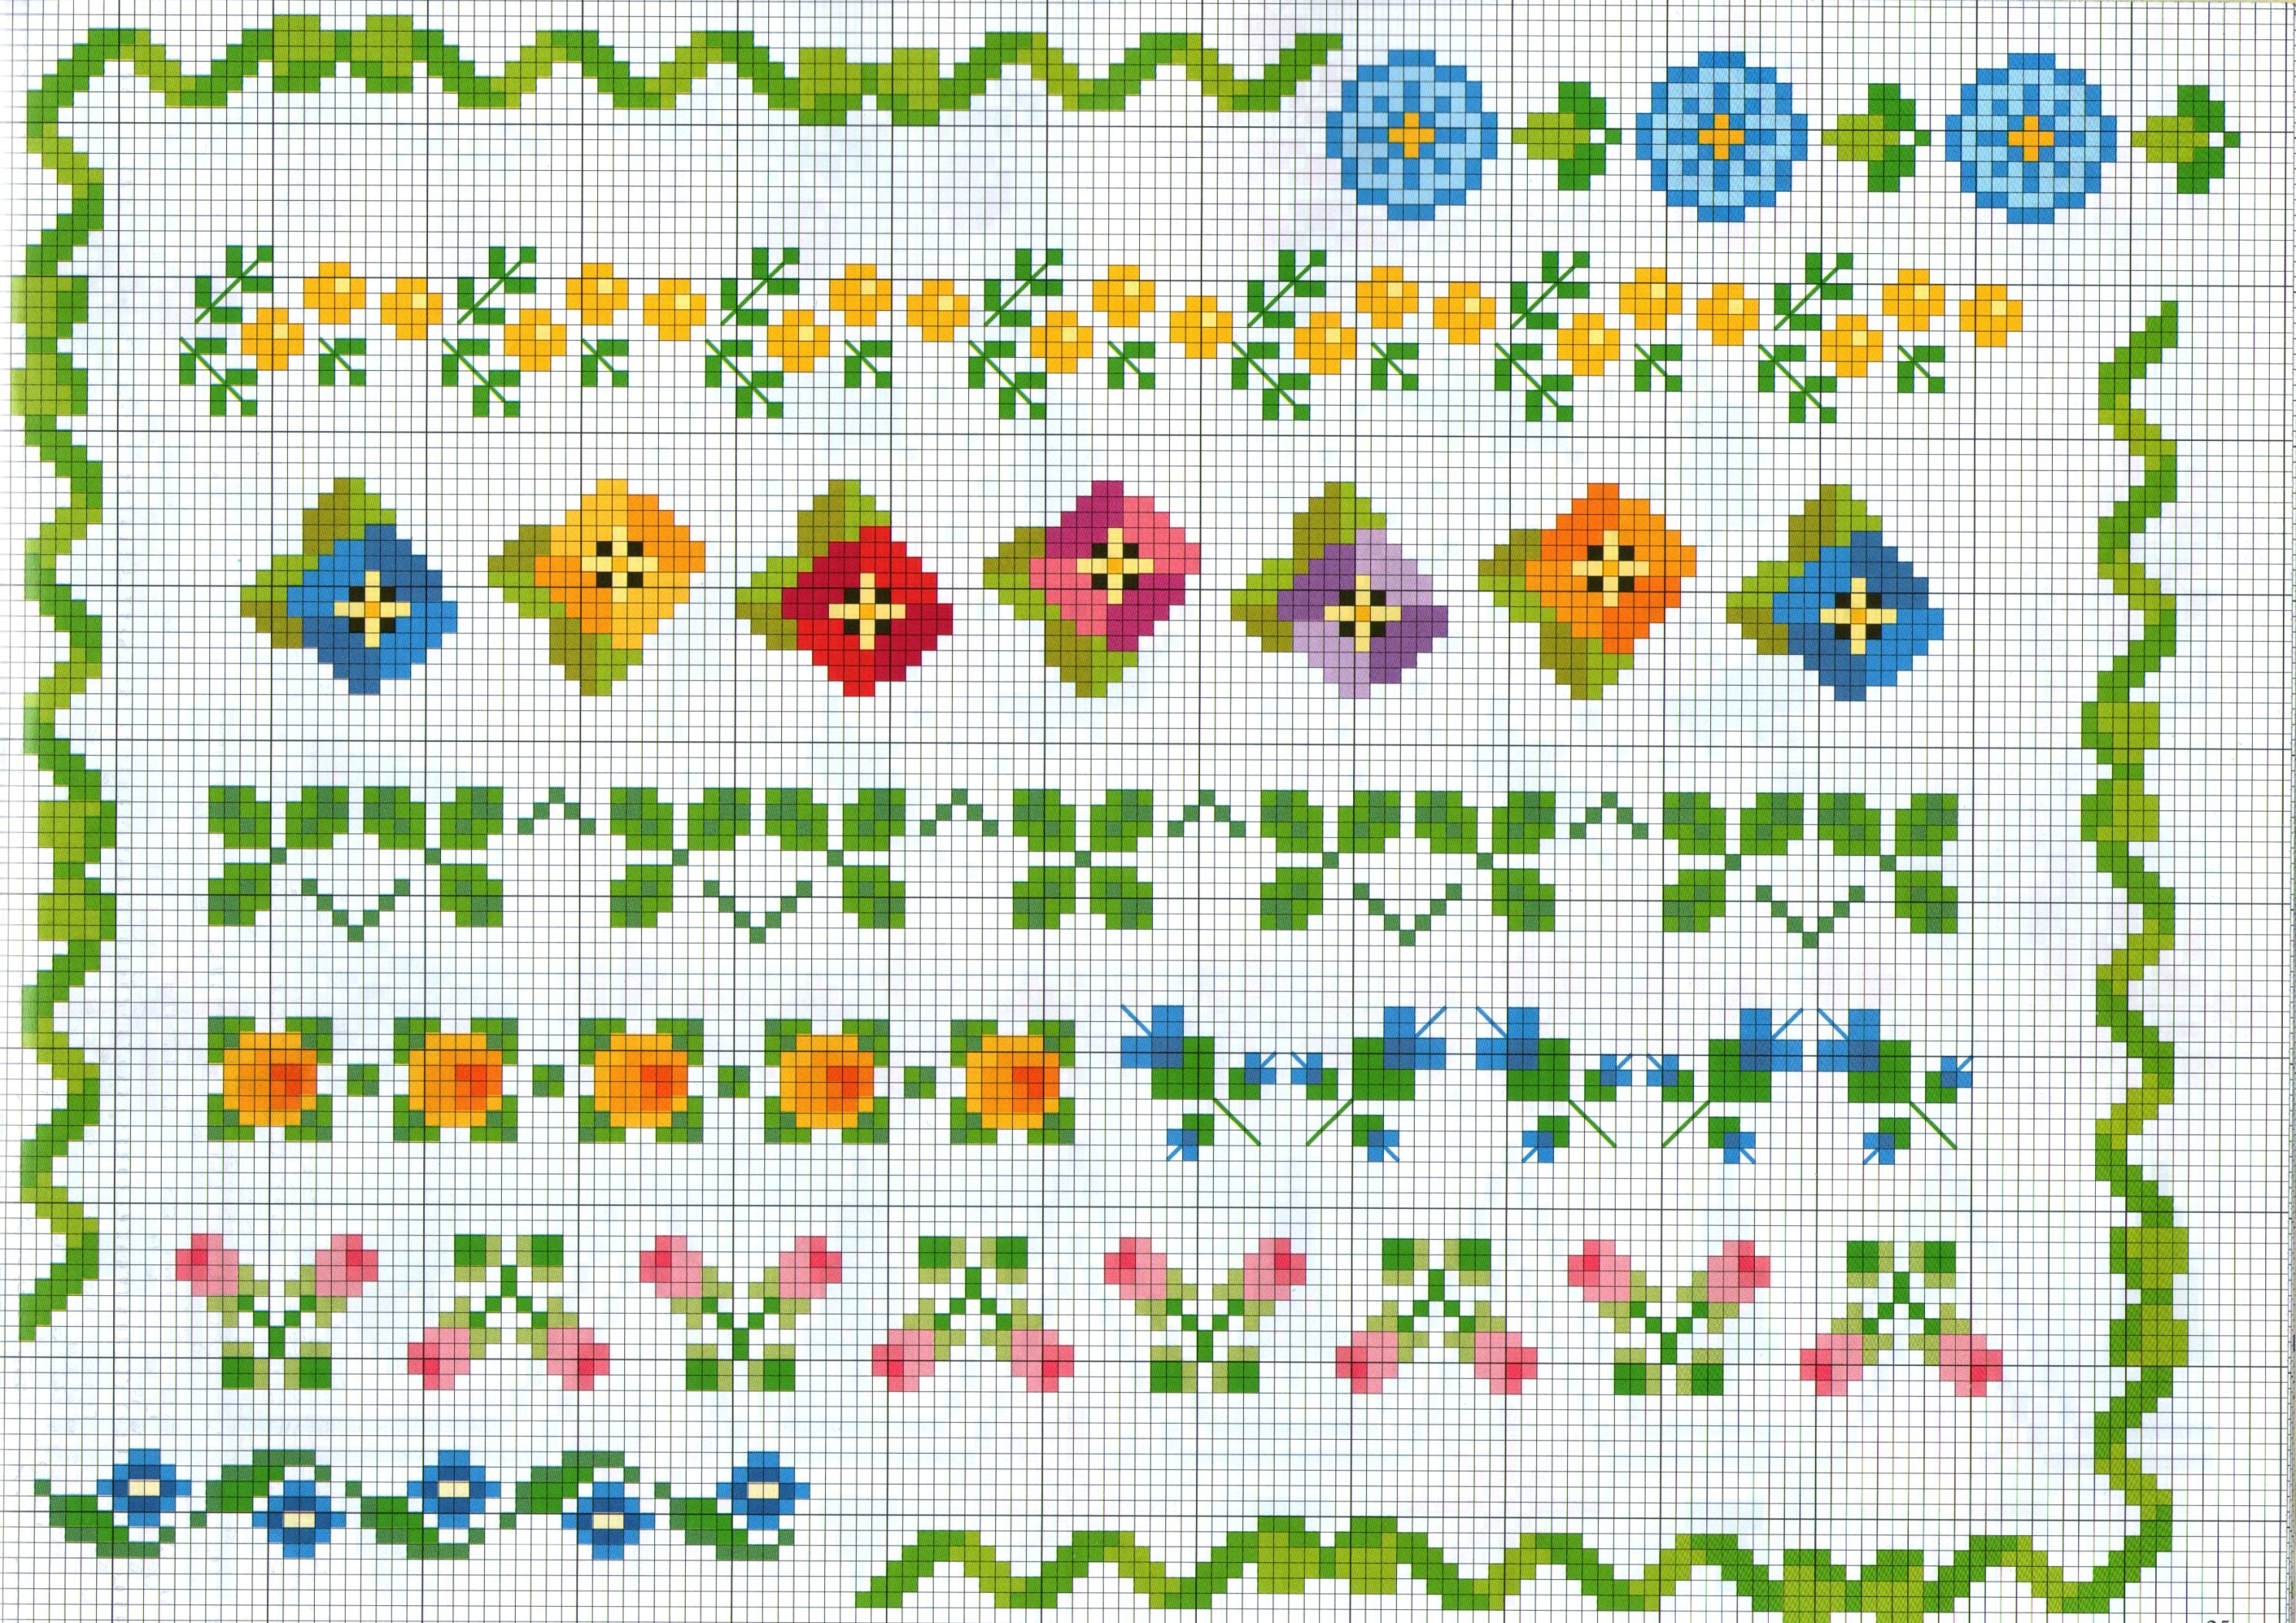 various cross-stitch borders with small motifs colored flowers